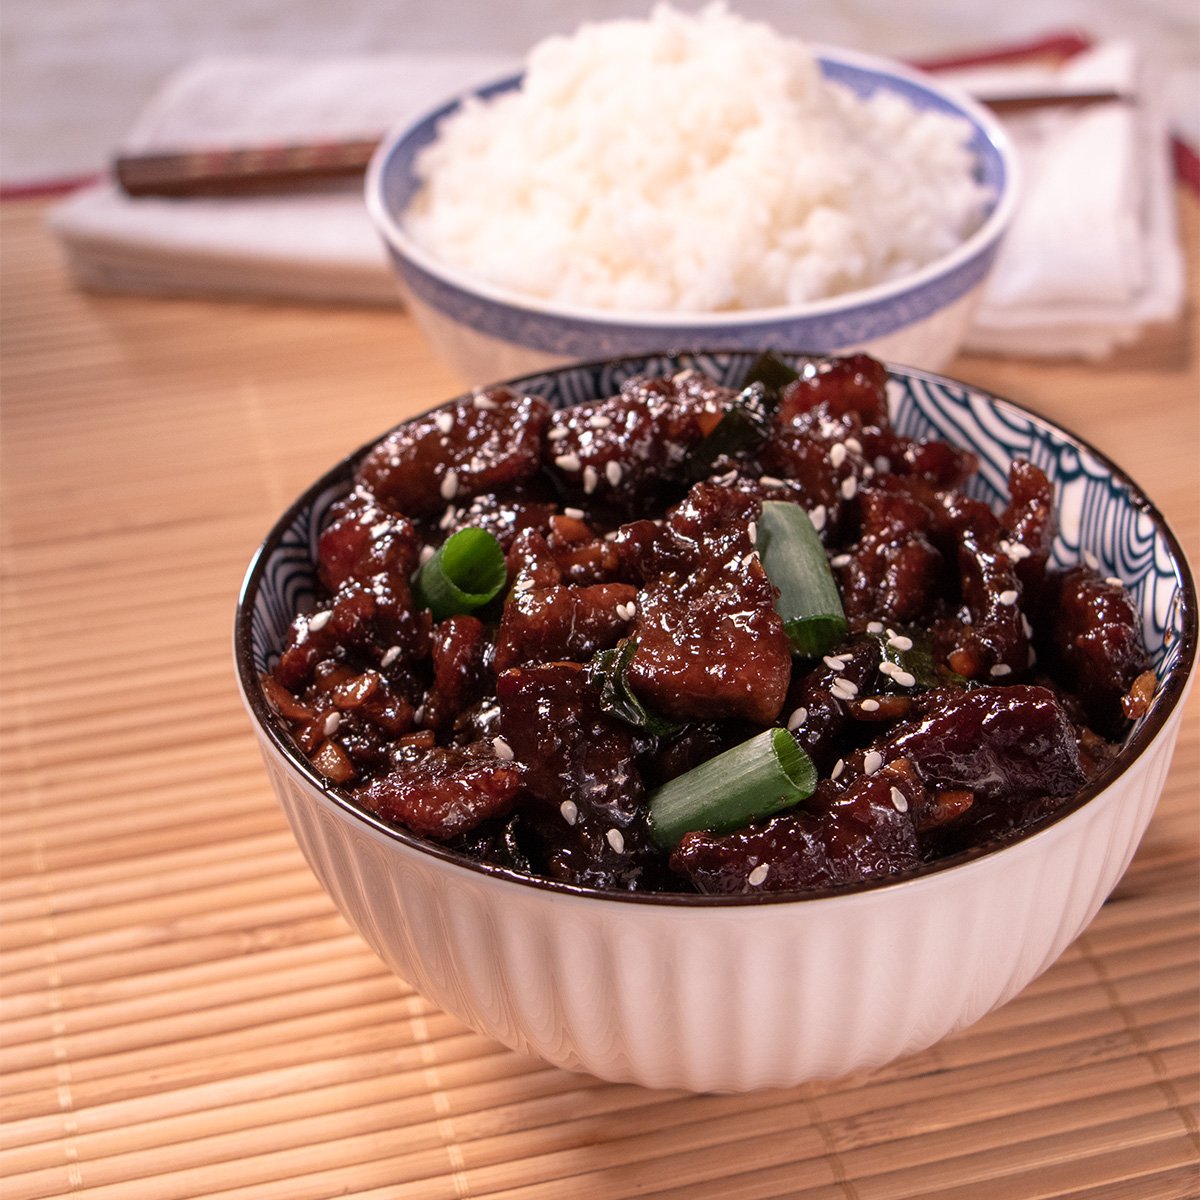 Craving umami flavors? Try our recipe for the best Halal Mongolian beef! Tender strips of beef are coated in a savory-sweet sauce, creating a dish that's perfect for satisfying your takeout cravings at home.

#MidamarHalal #Halal #HalalRecipe #Mongol